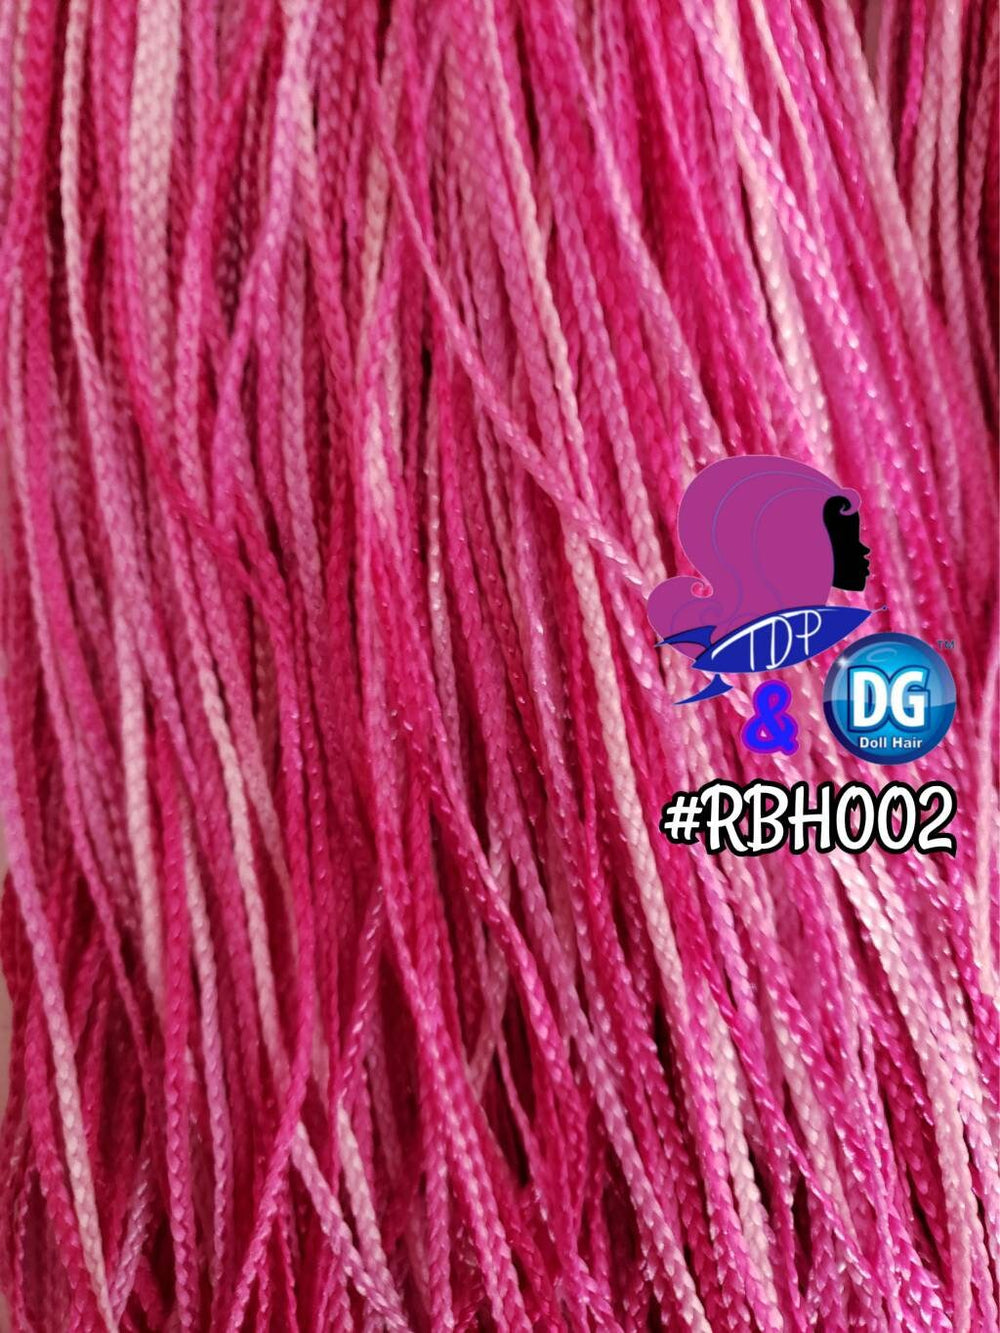 DG-HQ™ Nylon Micro Mini Braids Ombre Pink #RBH002 2mm Doll Hair Rerooting Barbie™ Monster High™ Integrity Fr Poppy® Limited Quantity